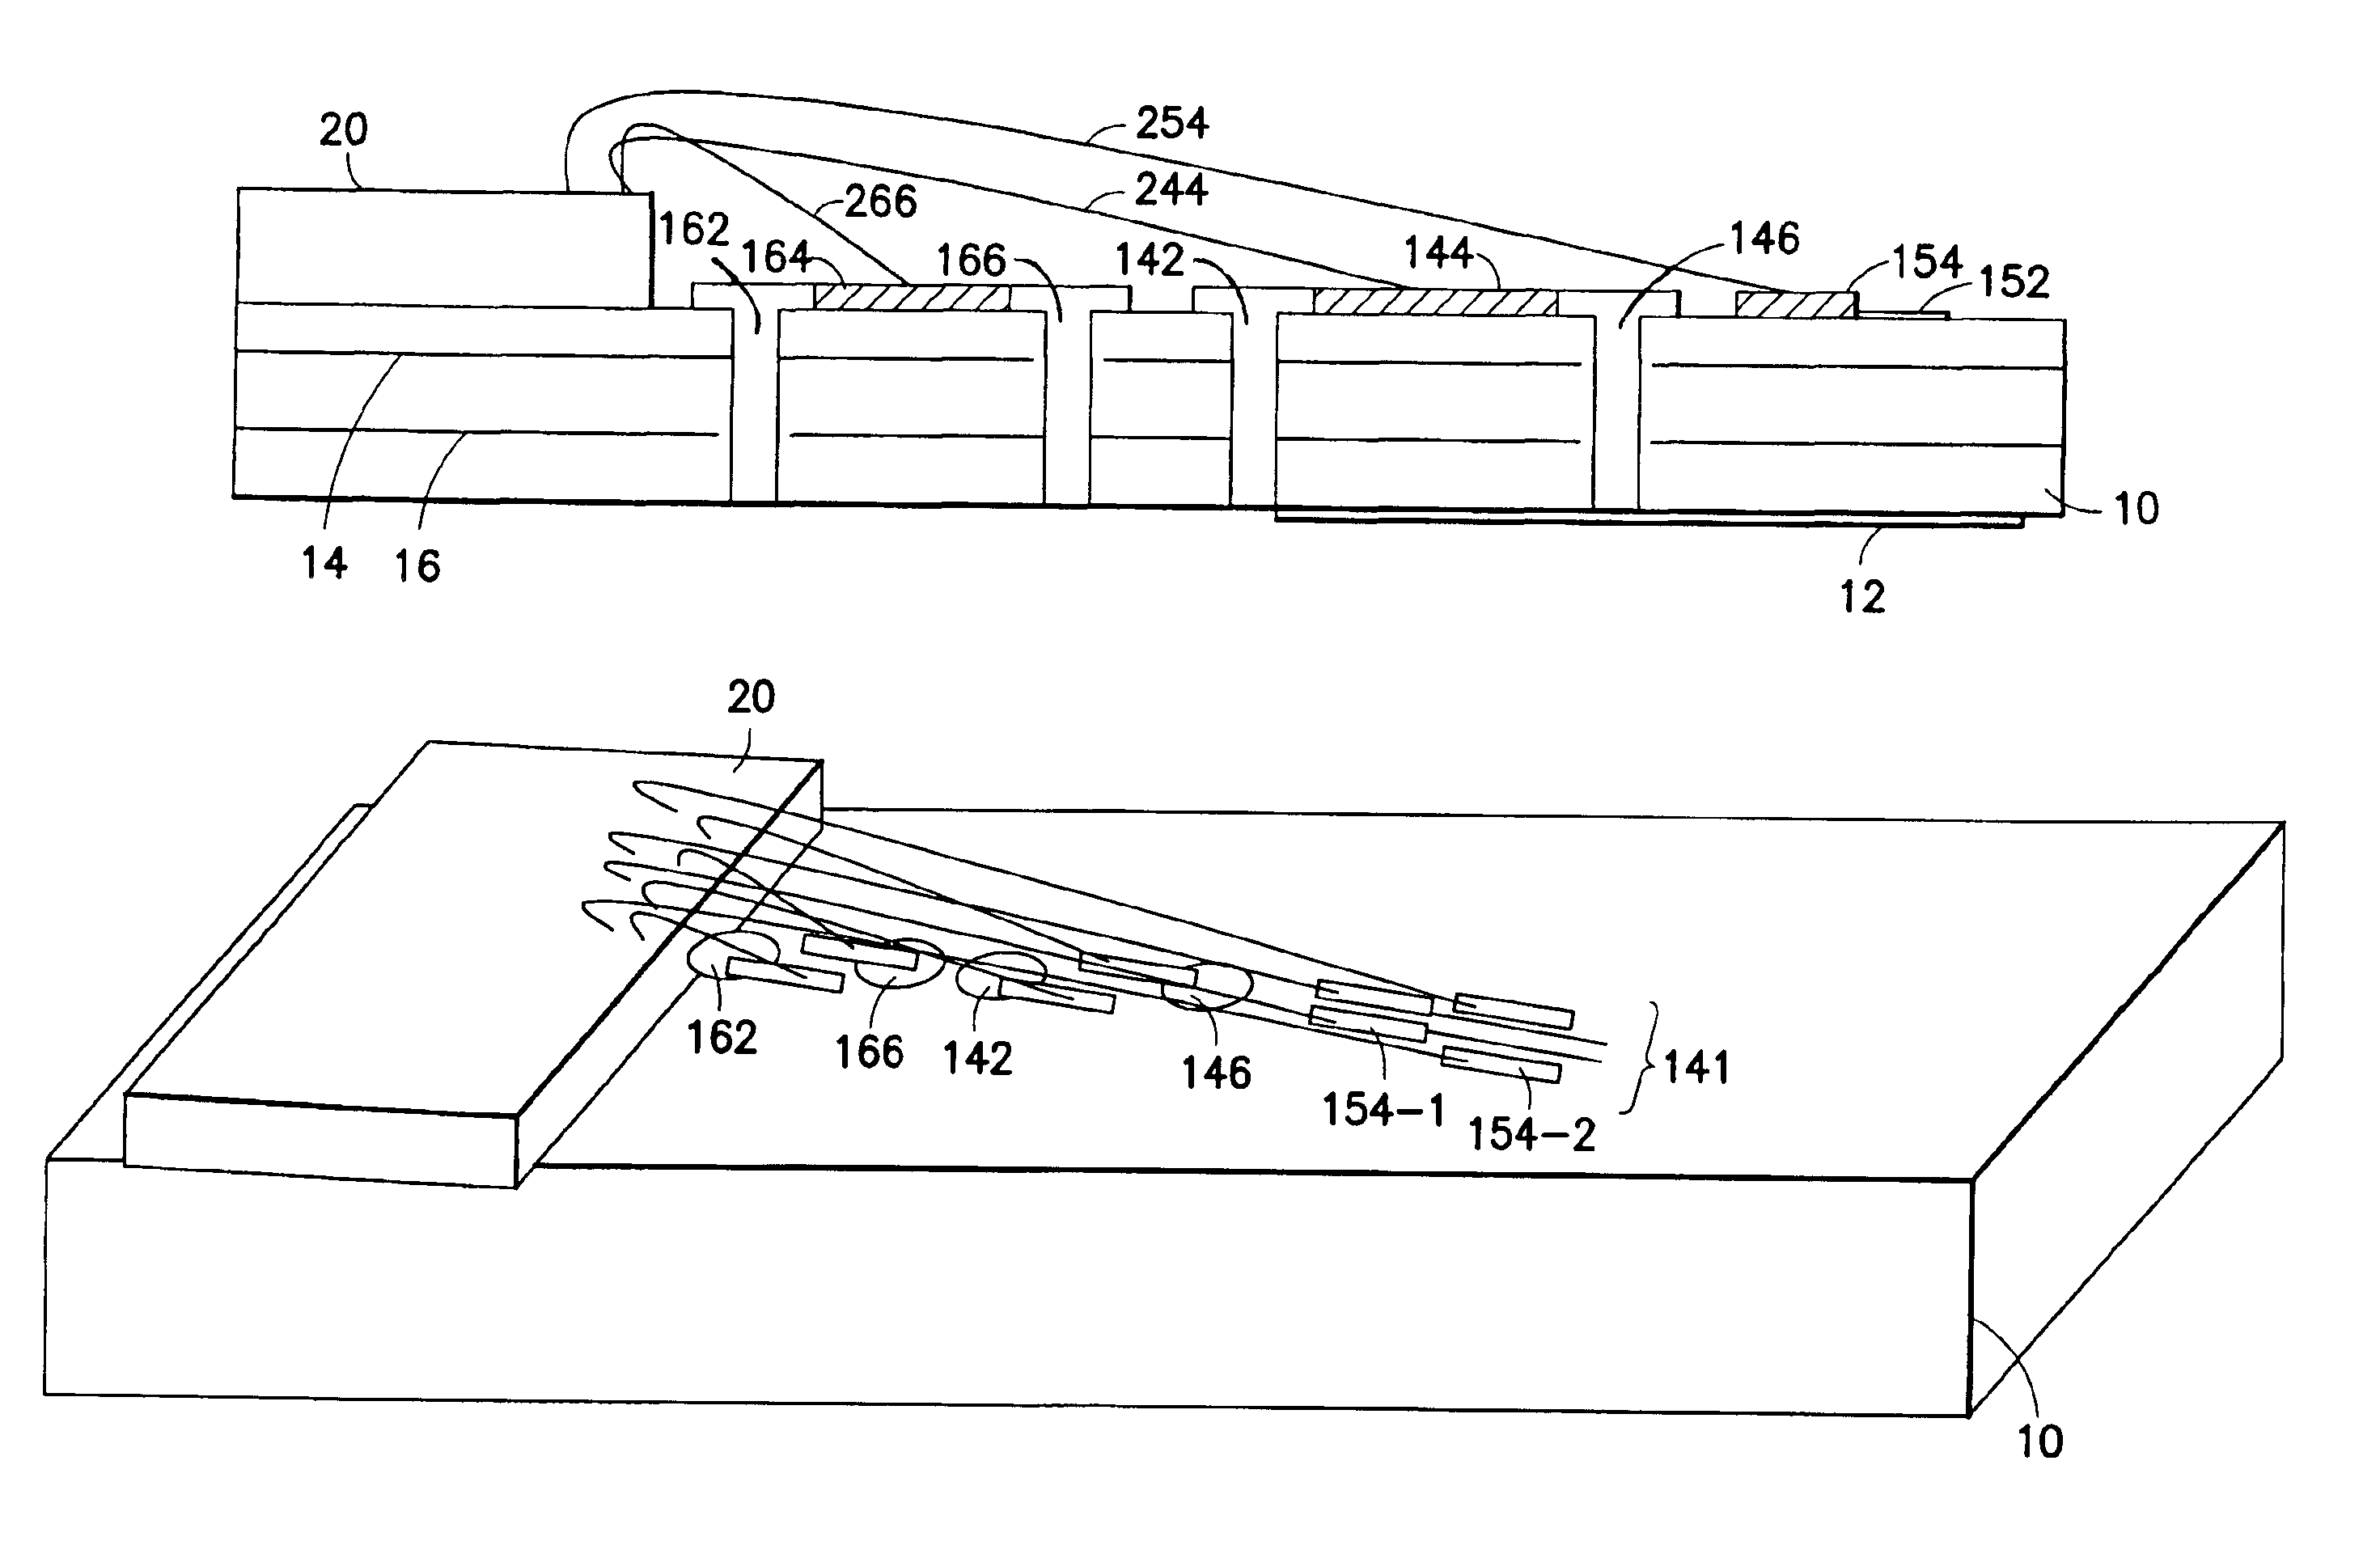 Integrated circuit package with overlapping bond fingers